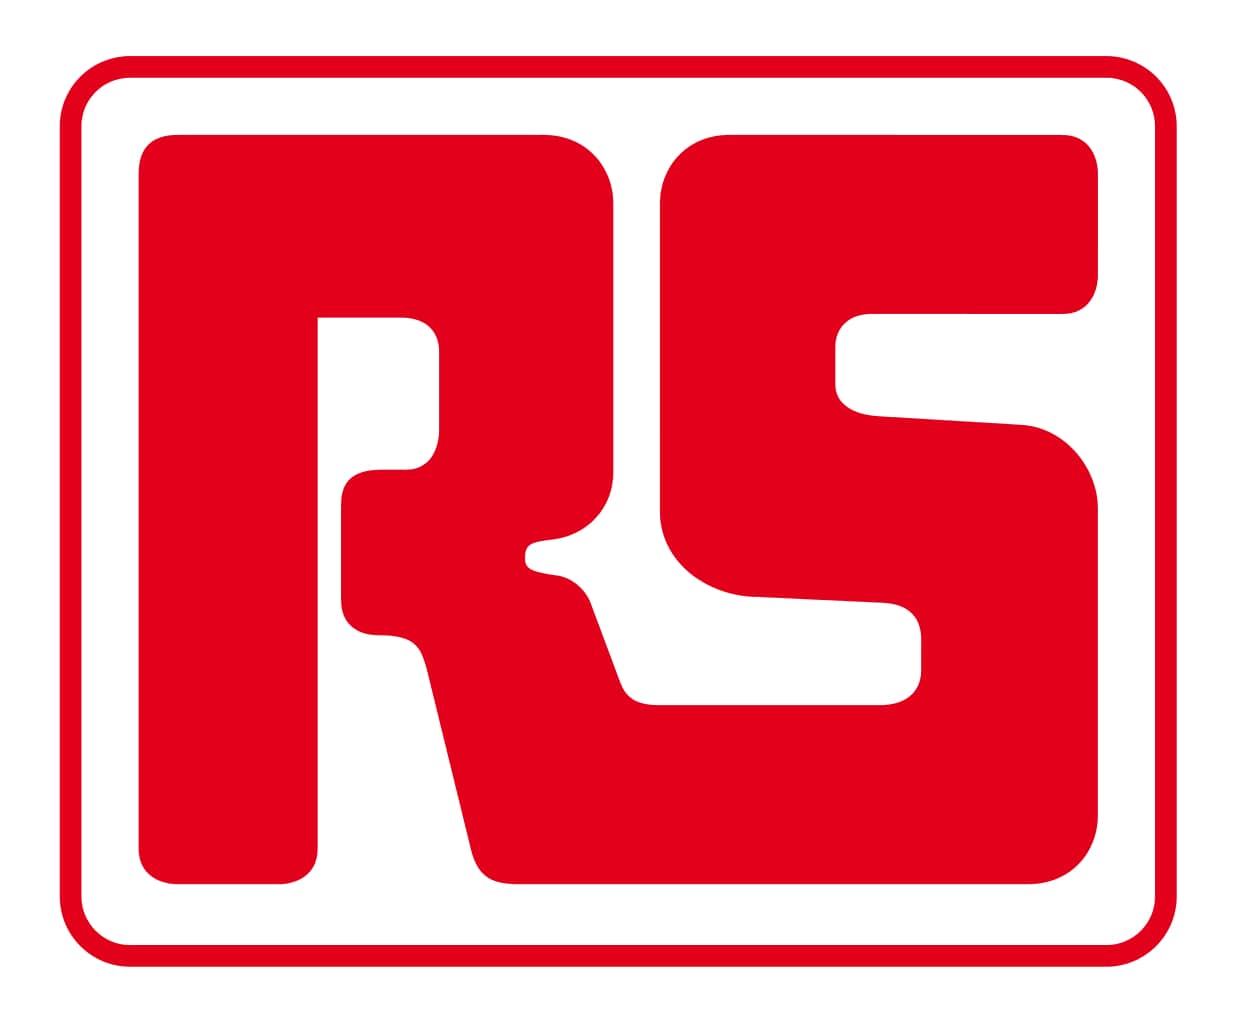 RS Group Logo